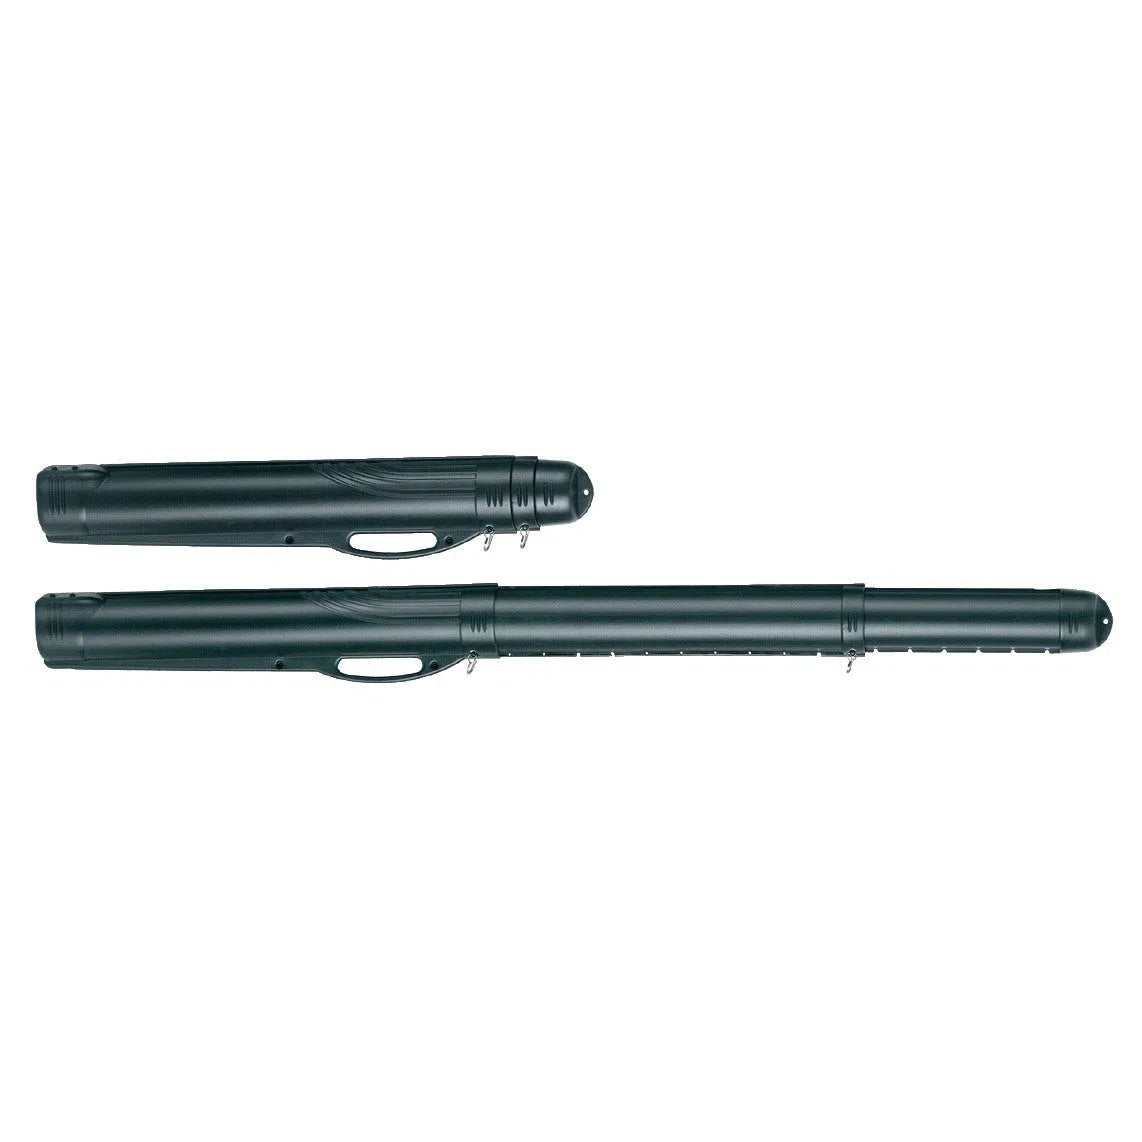 Plano Airliner Telescopic Rod Tube 4588-Rod & Reel Covers-Plano-Fishing Station